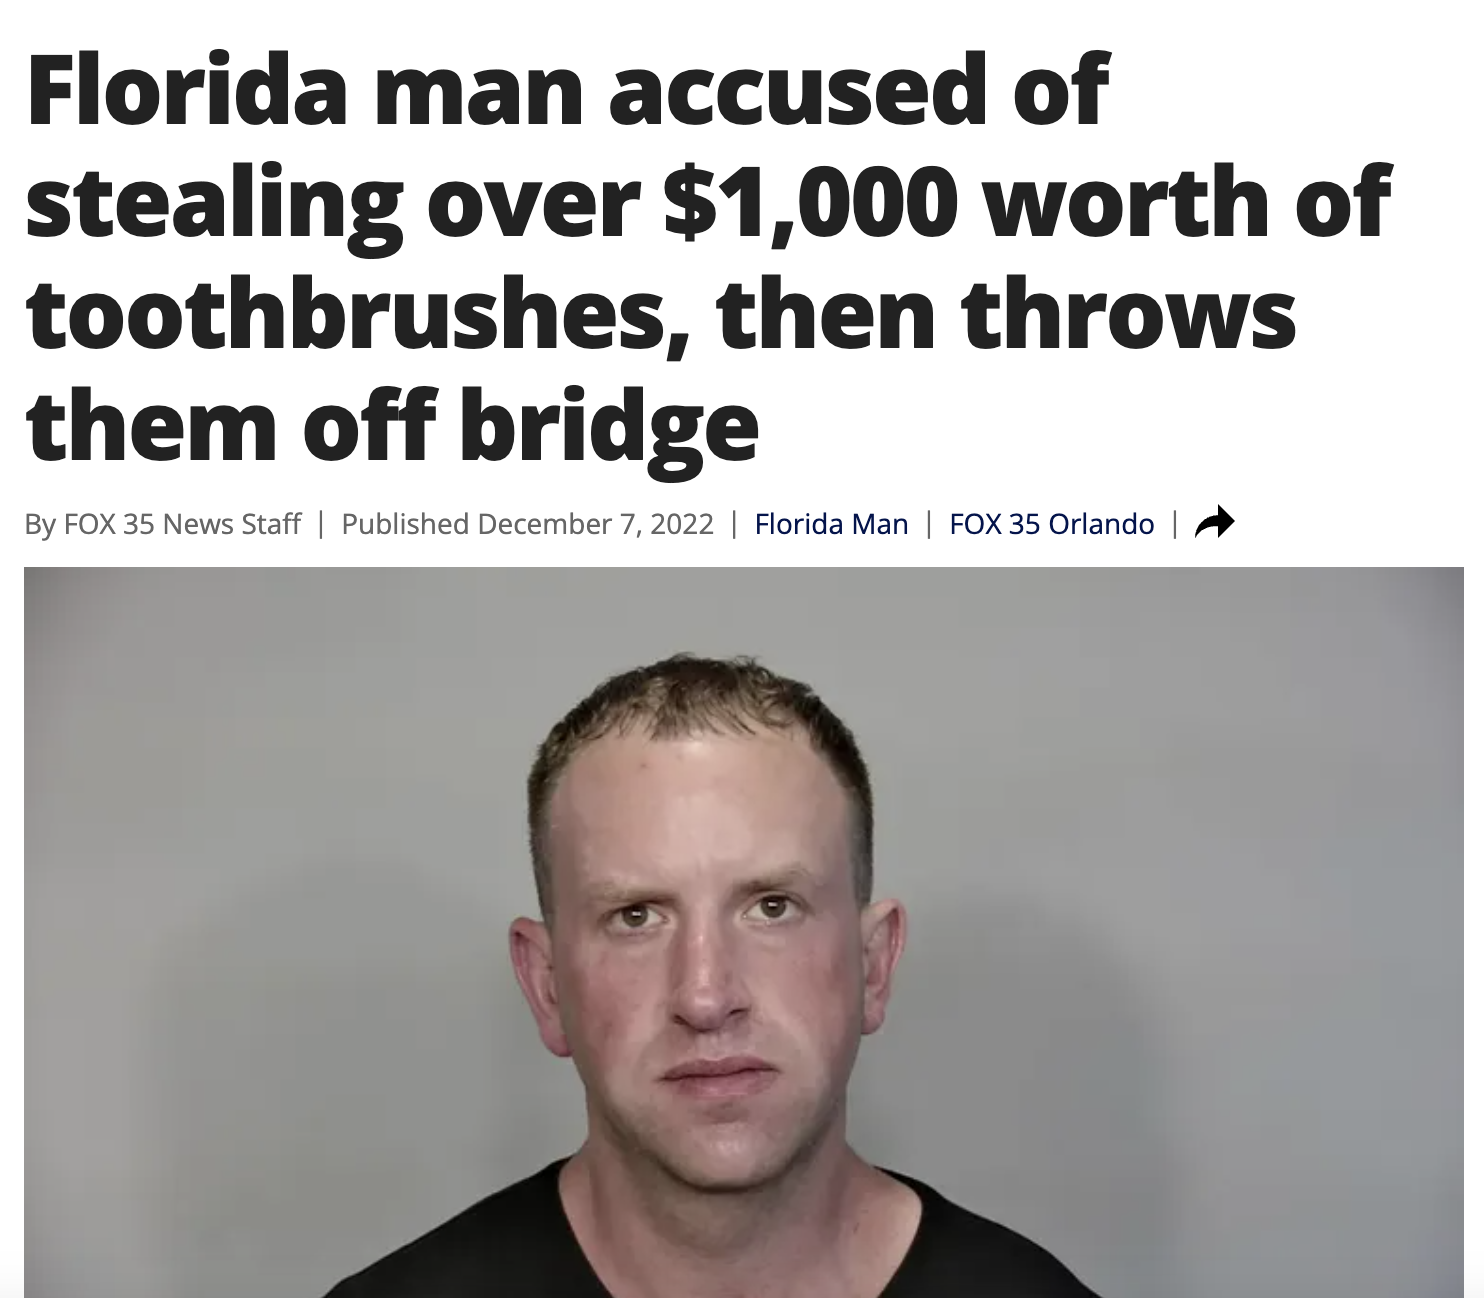 Best of Florida Man 2022 - Toothbrush - Florida man accused of stealing over $1,000 worth of toothbrushes, then throws them off bridge By Fox 35 News Staff | Published | Florida Man | Fox 35 Orlando